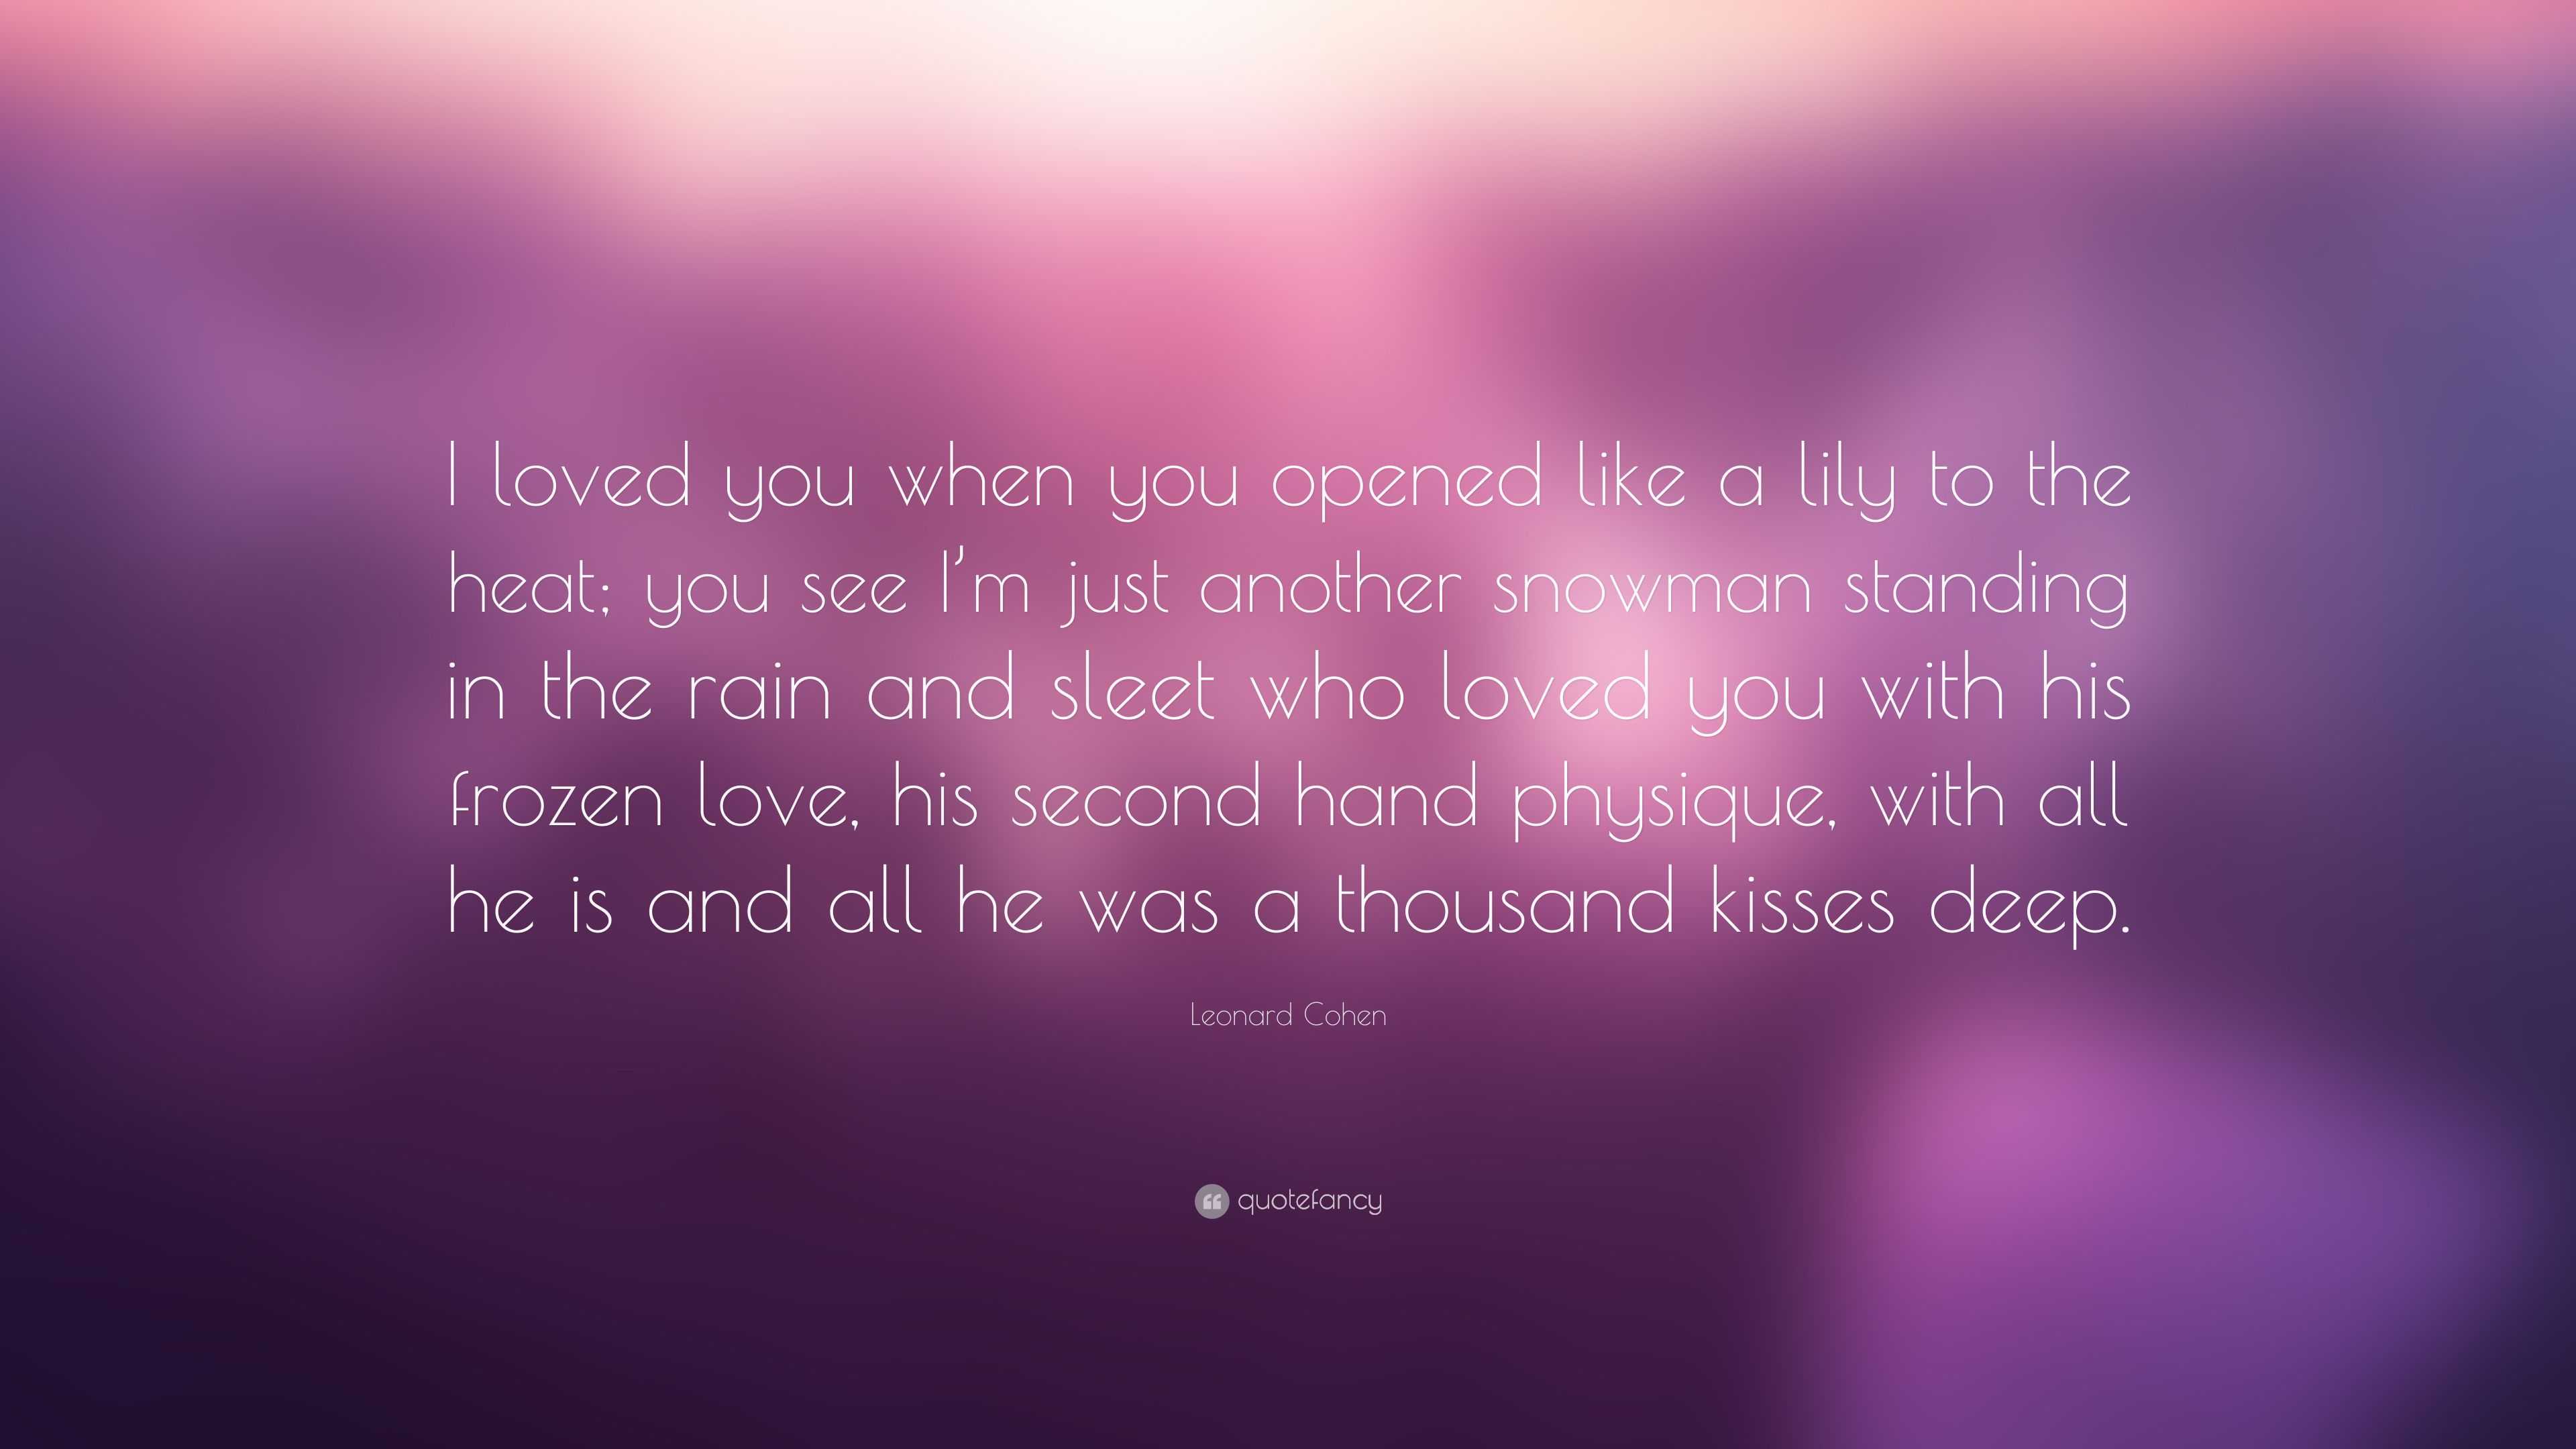 Leonard Cohen Quote: “I loved you when you opened like a lily to the ...